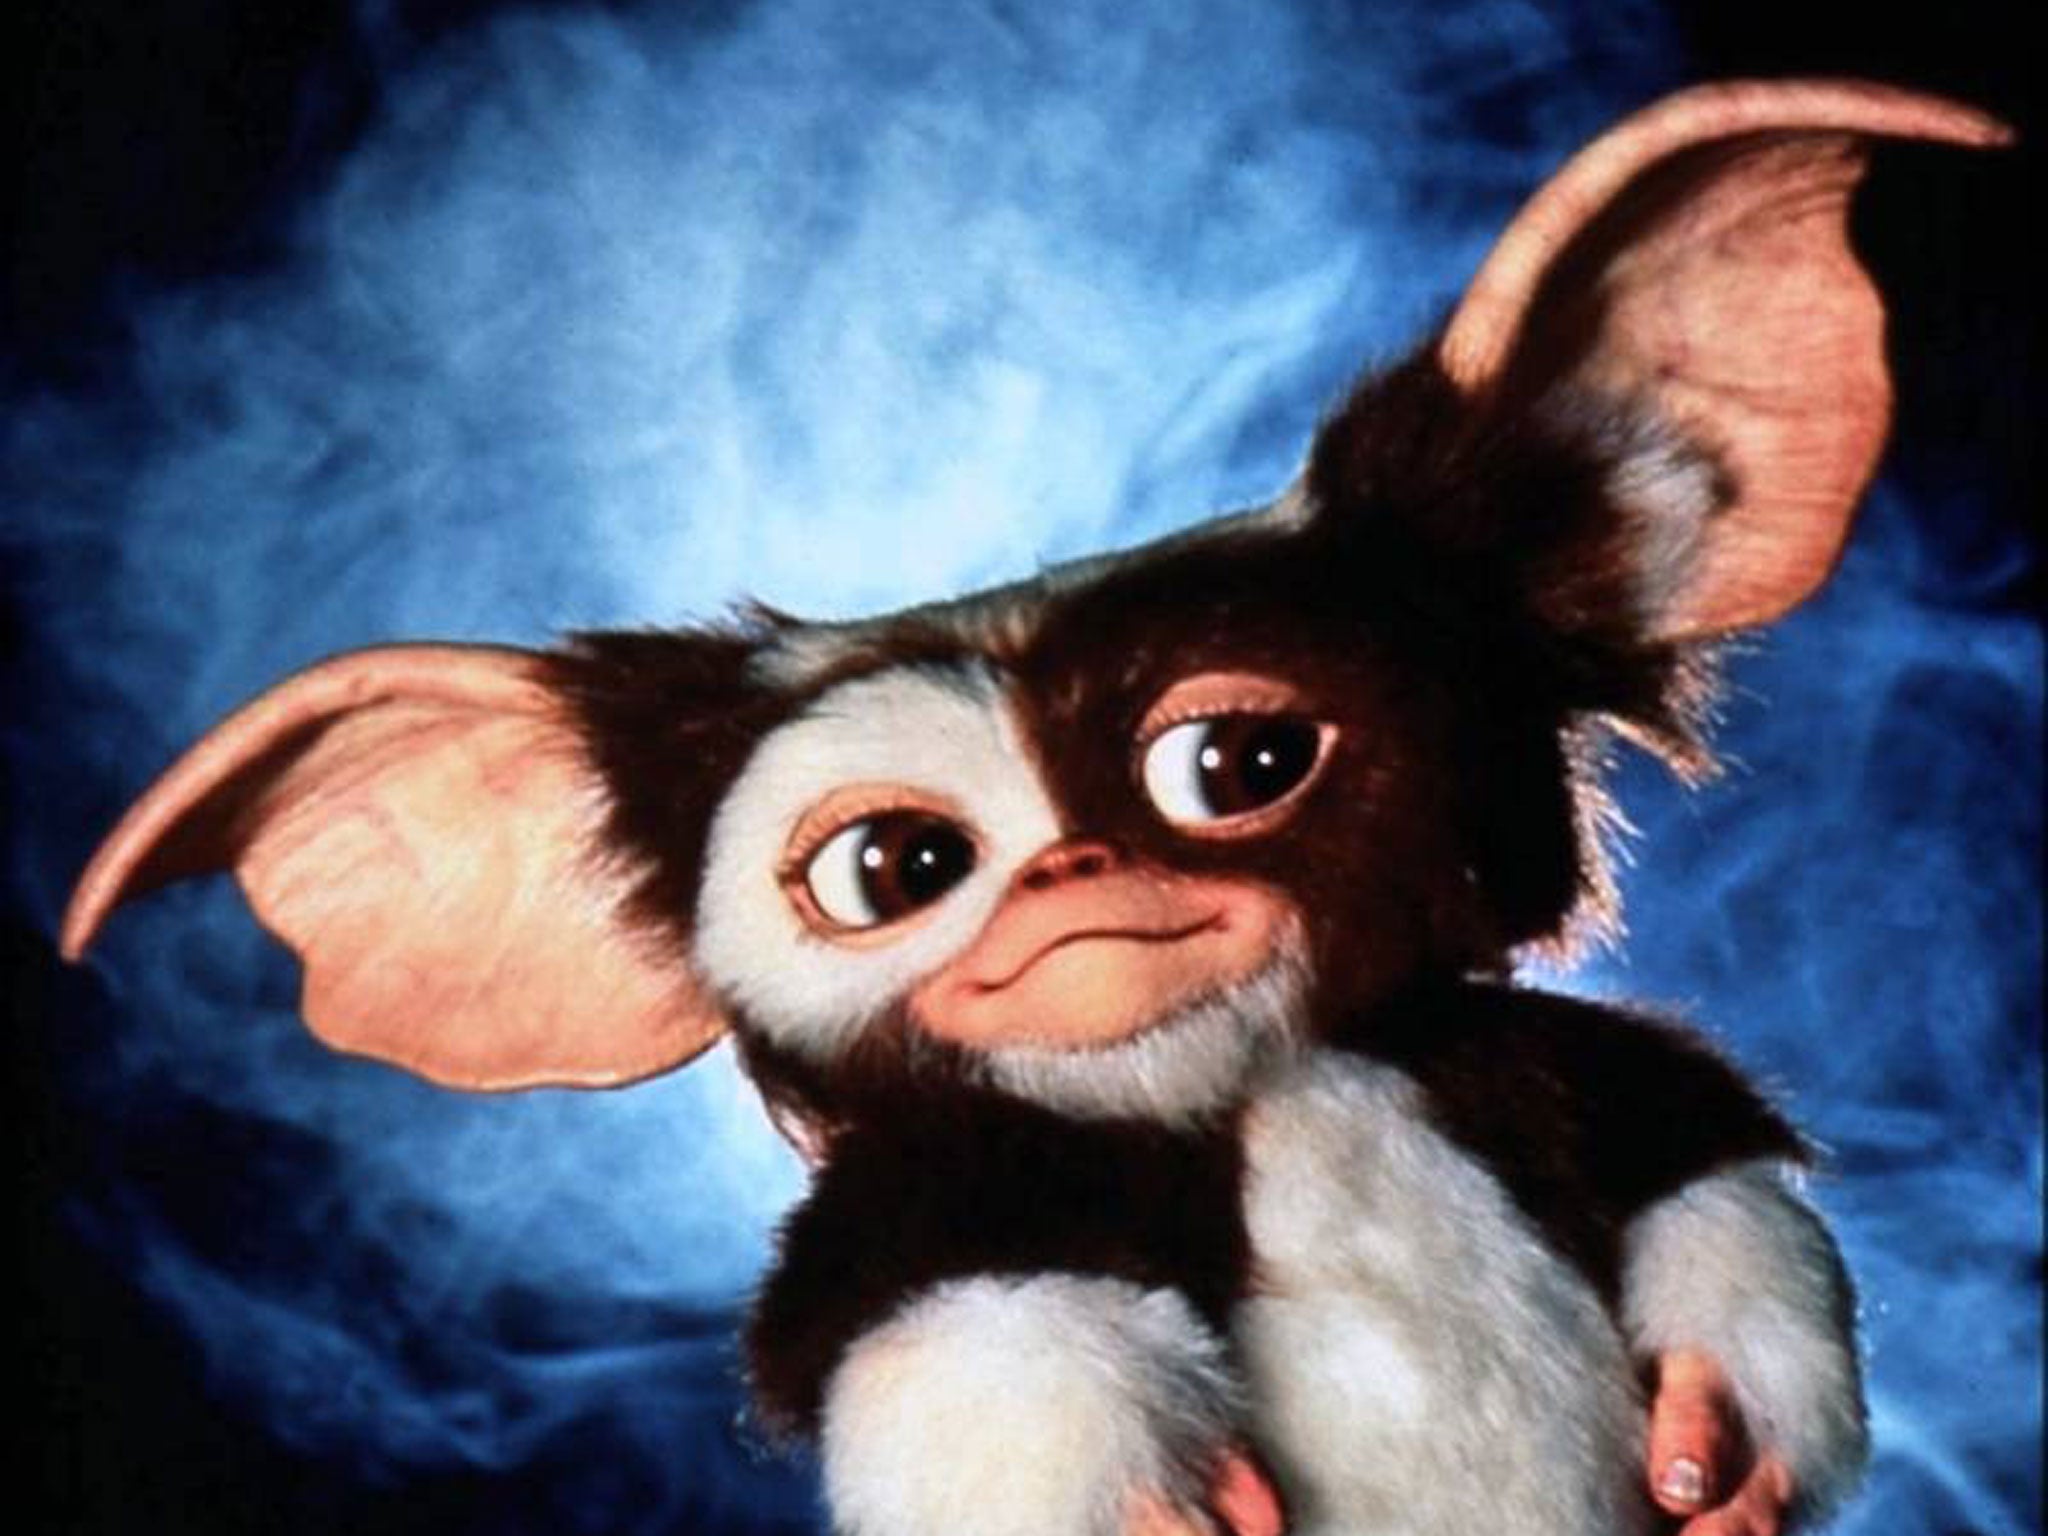 Gremlins is getting an animated prequel series